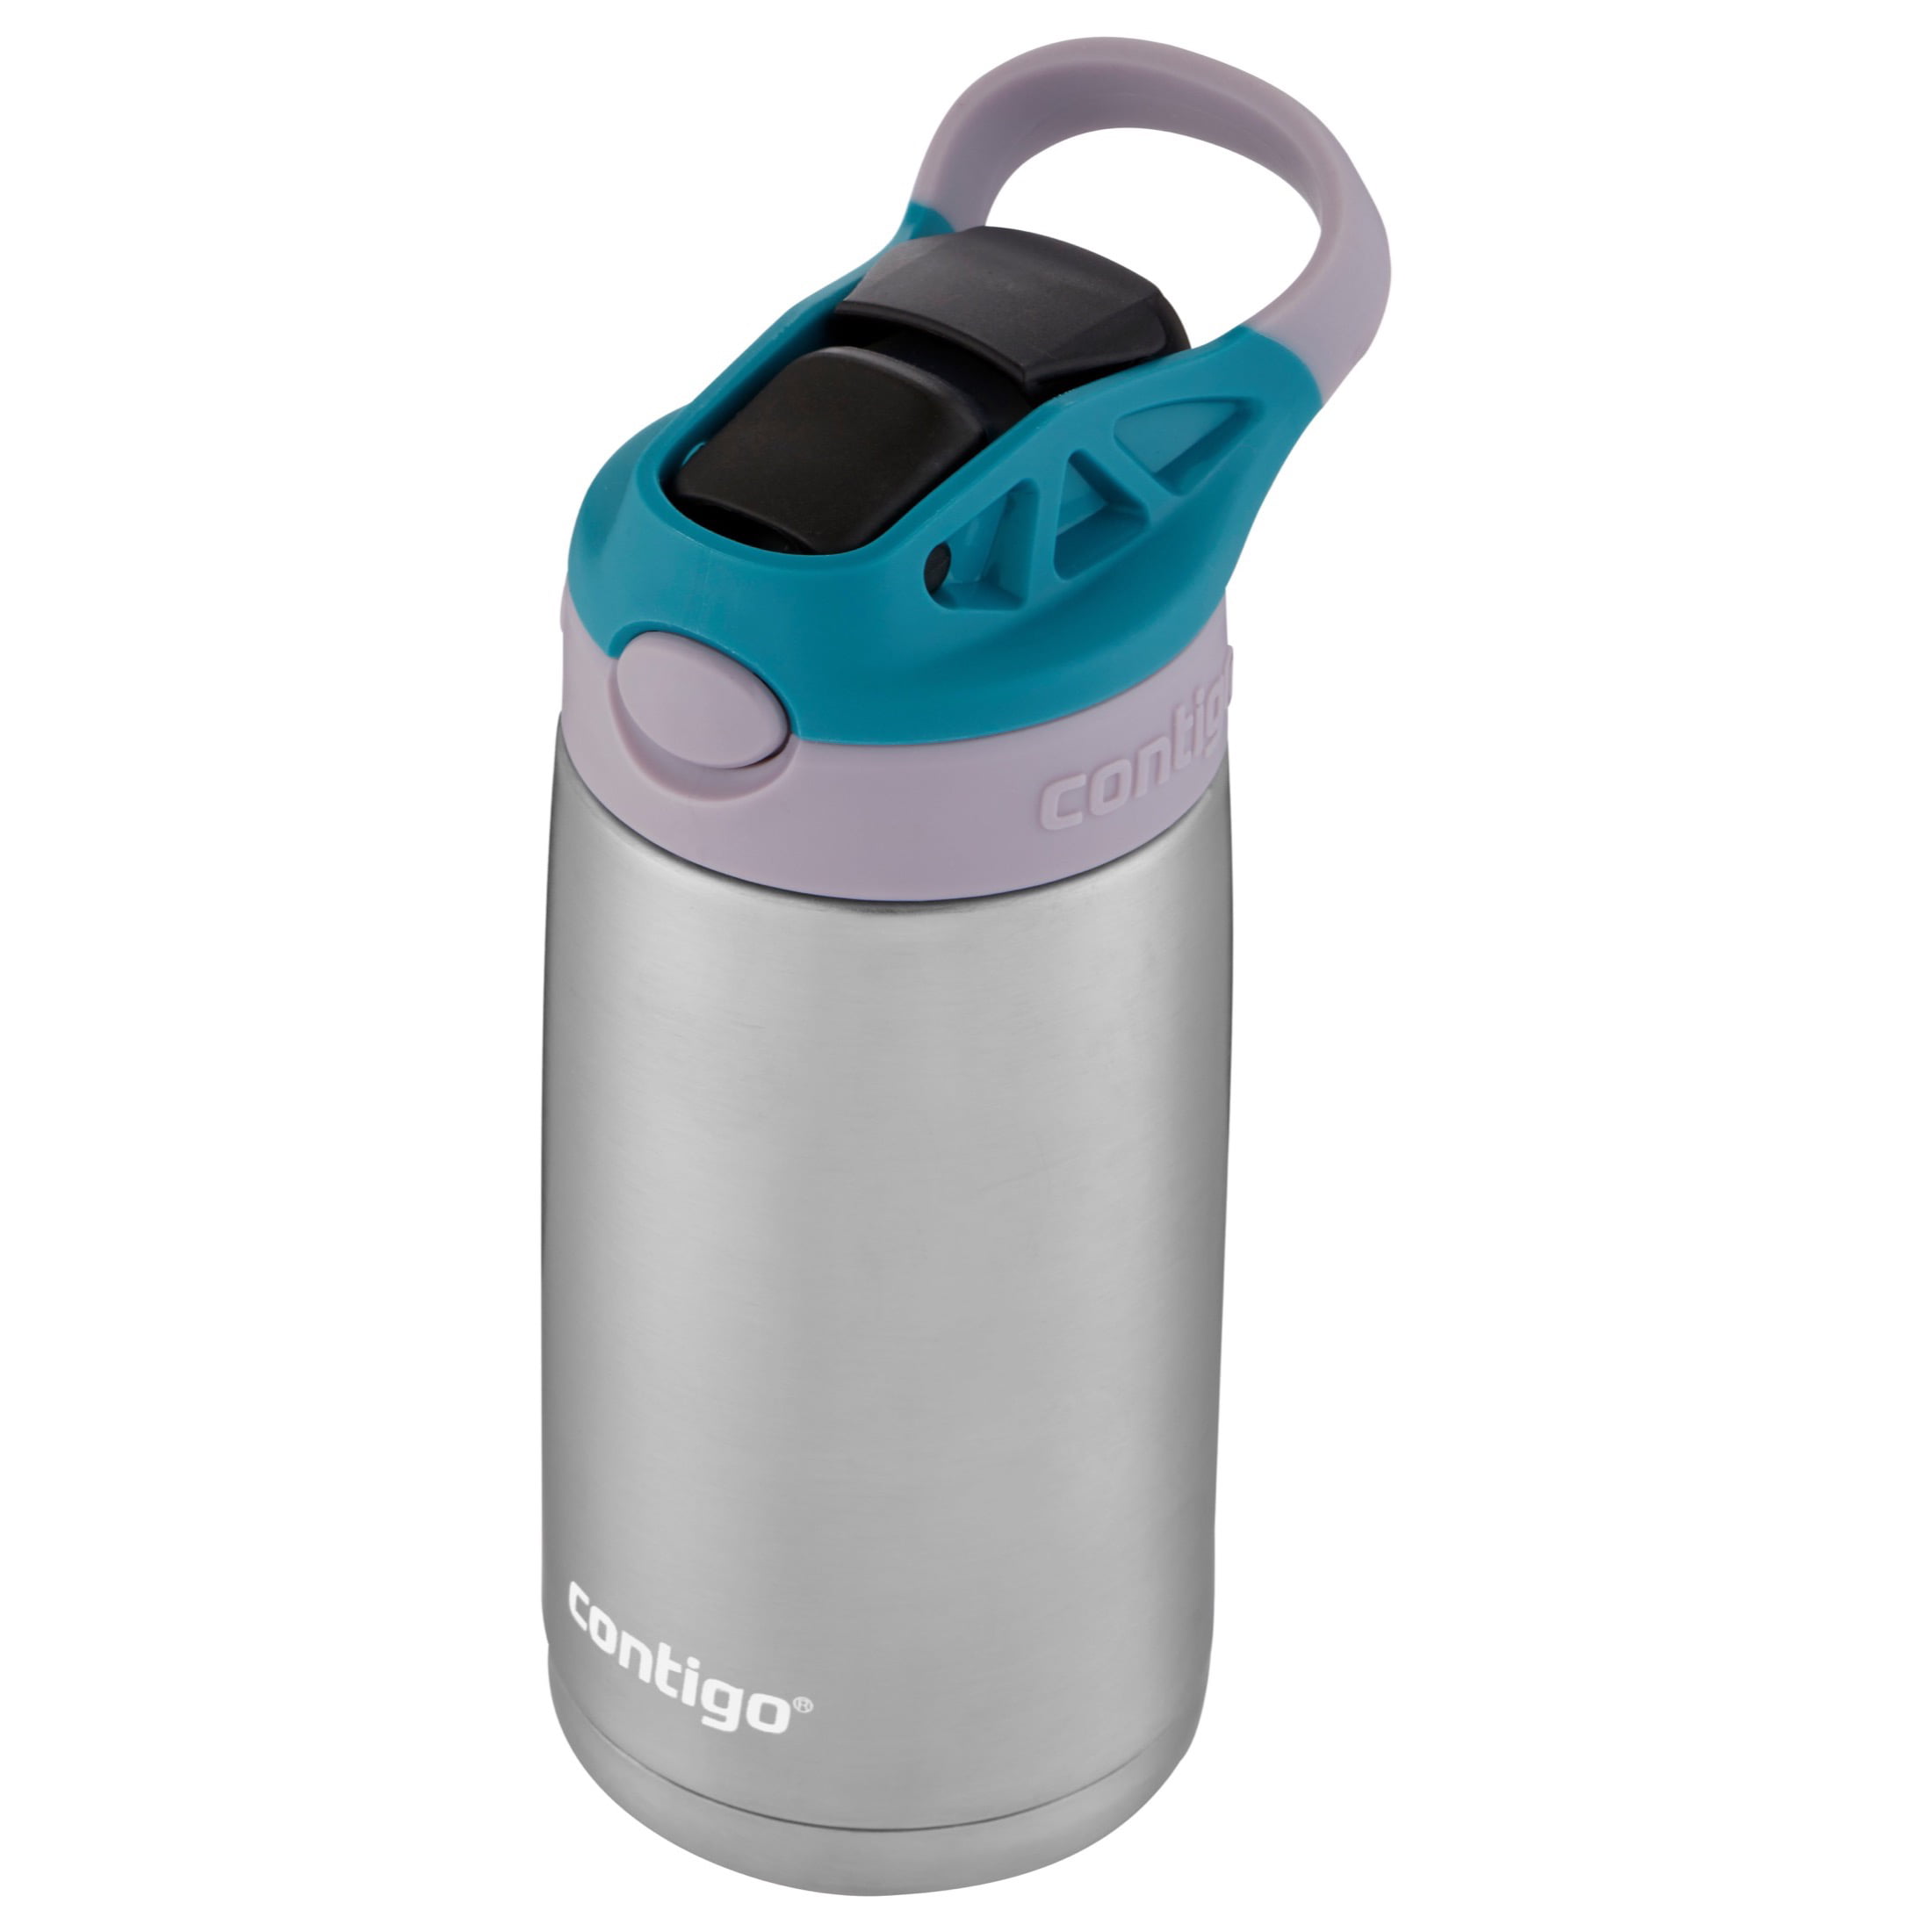 Contigo Kids Stainless Steel Water Bottle with Redesigned AUTOSPOUT Straw  Lid Taro and Juniper, 13 fl oz. 